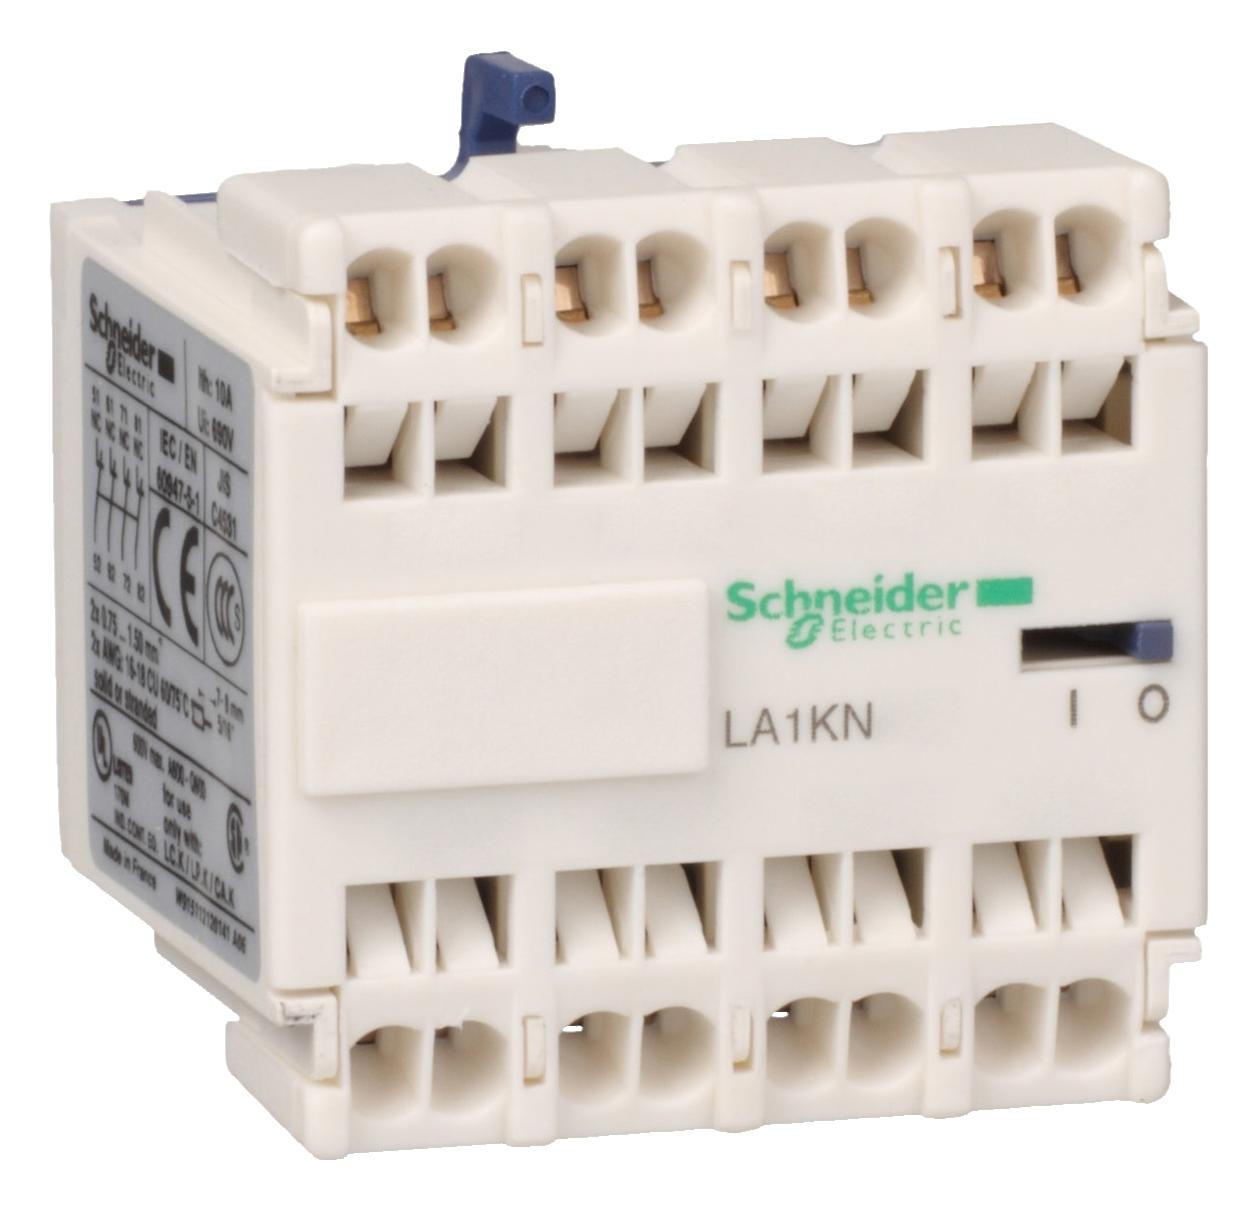 LA1KN043 AUXILIARY CONTACTS SCHNEIDER ELECTRIC